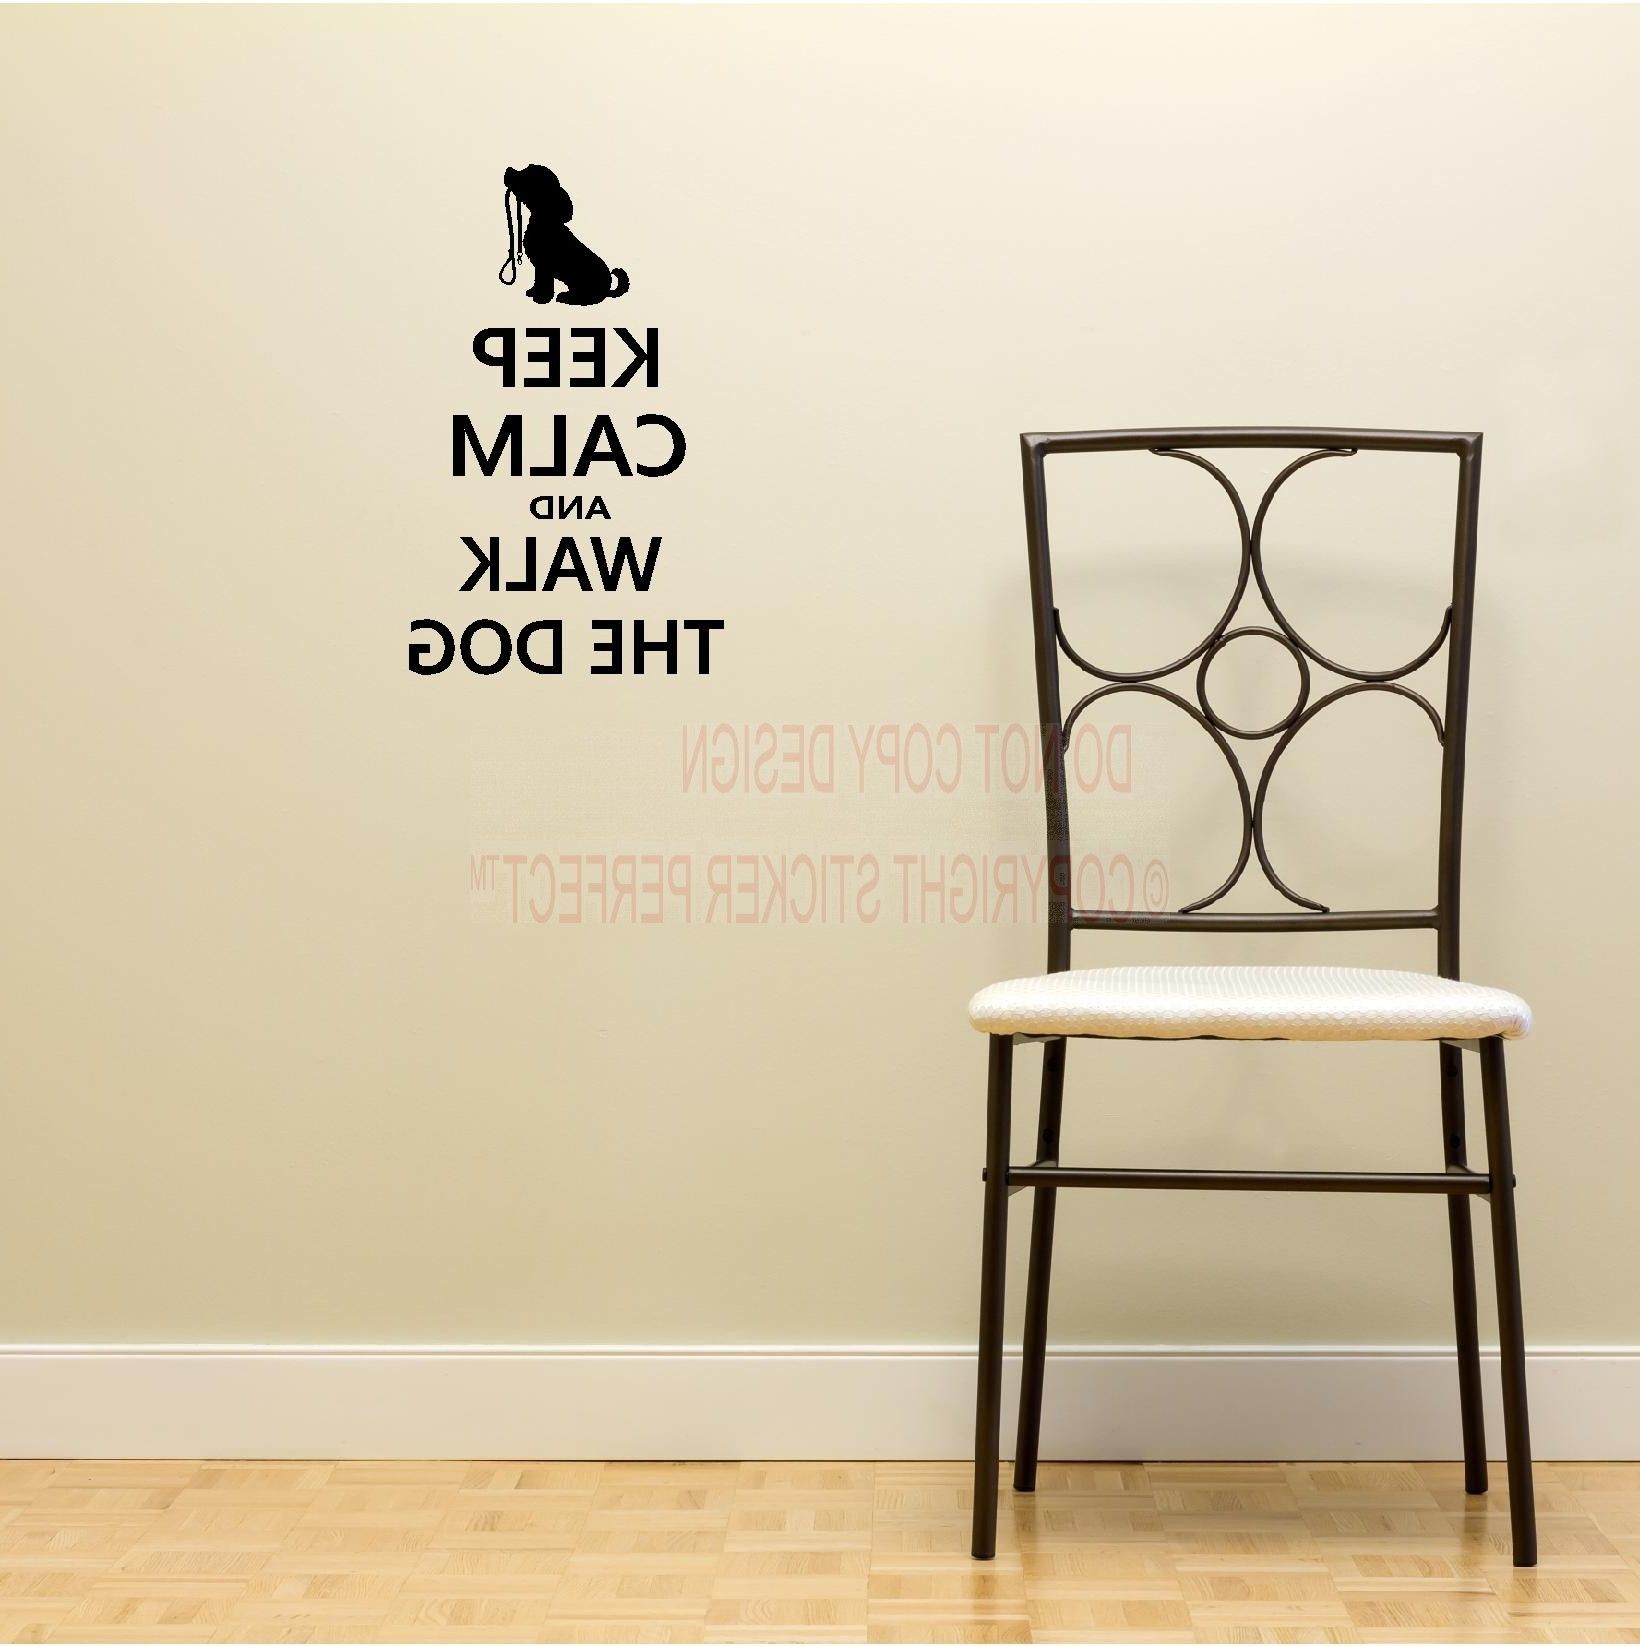 Most Popular 2 Keep Calm And Walk The Dog Decals Cute Puppy Wall Art Wall Sayings With Regard To Wall Art Sayings (View 20 of 20)